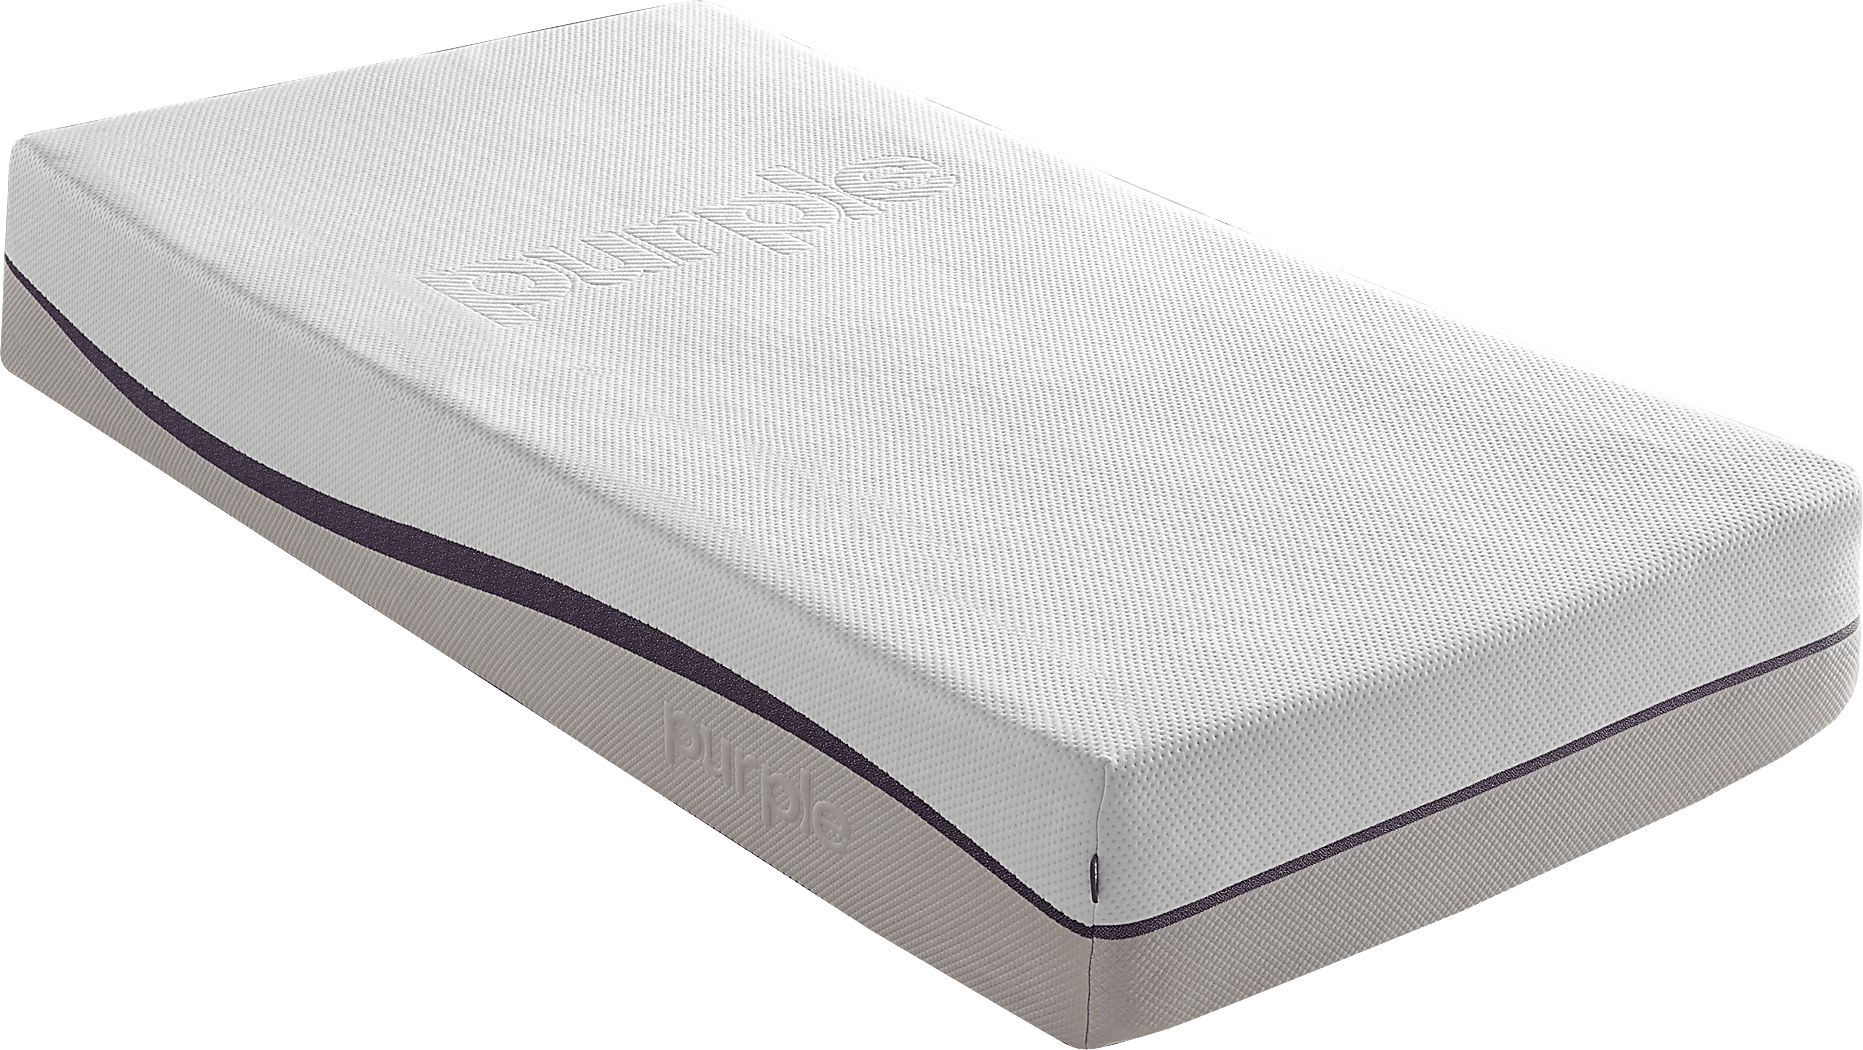 Twin Size Mattresses for Sale (single)